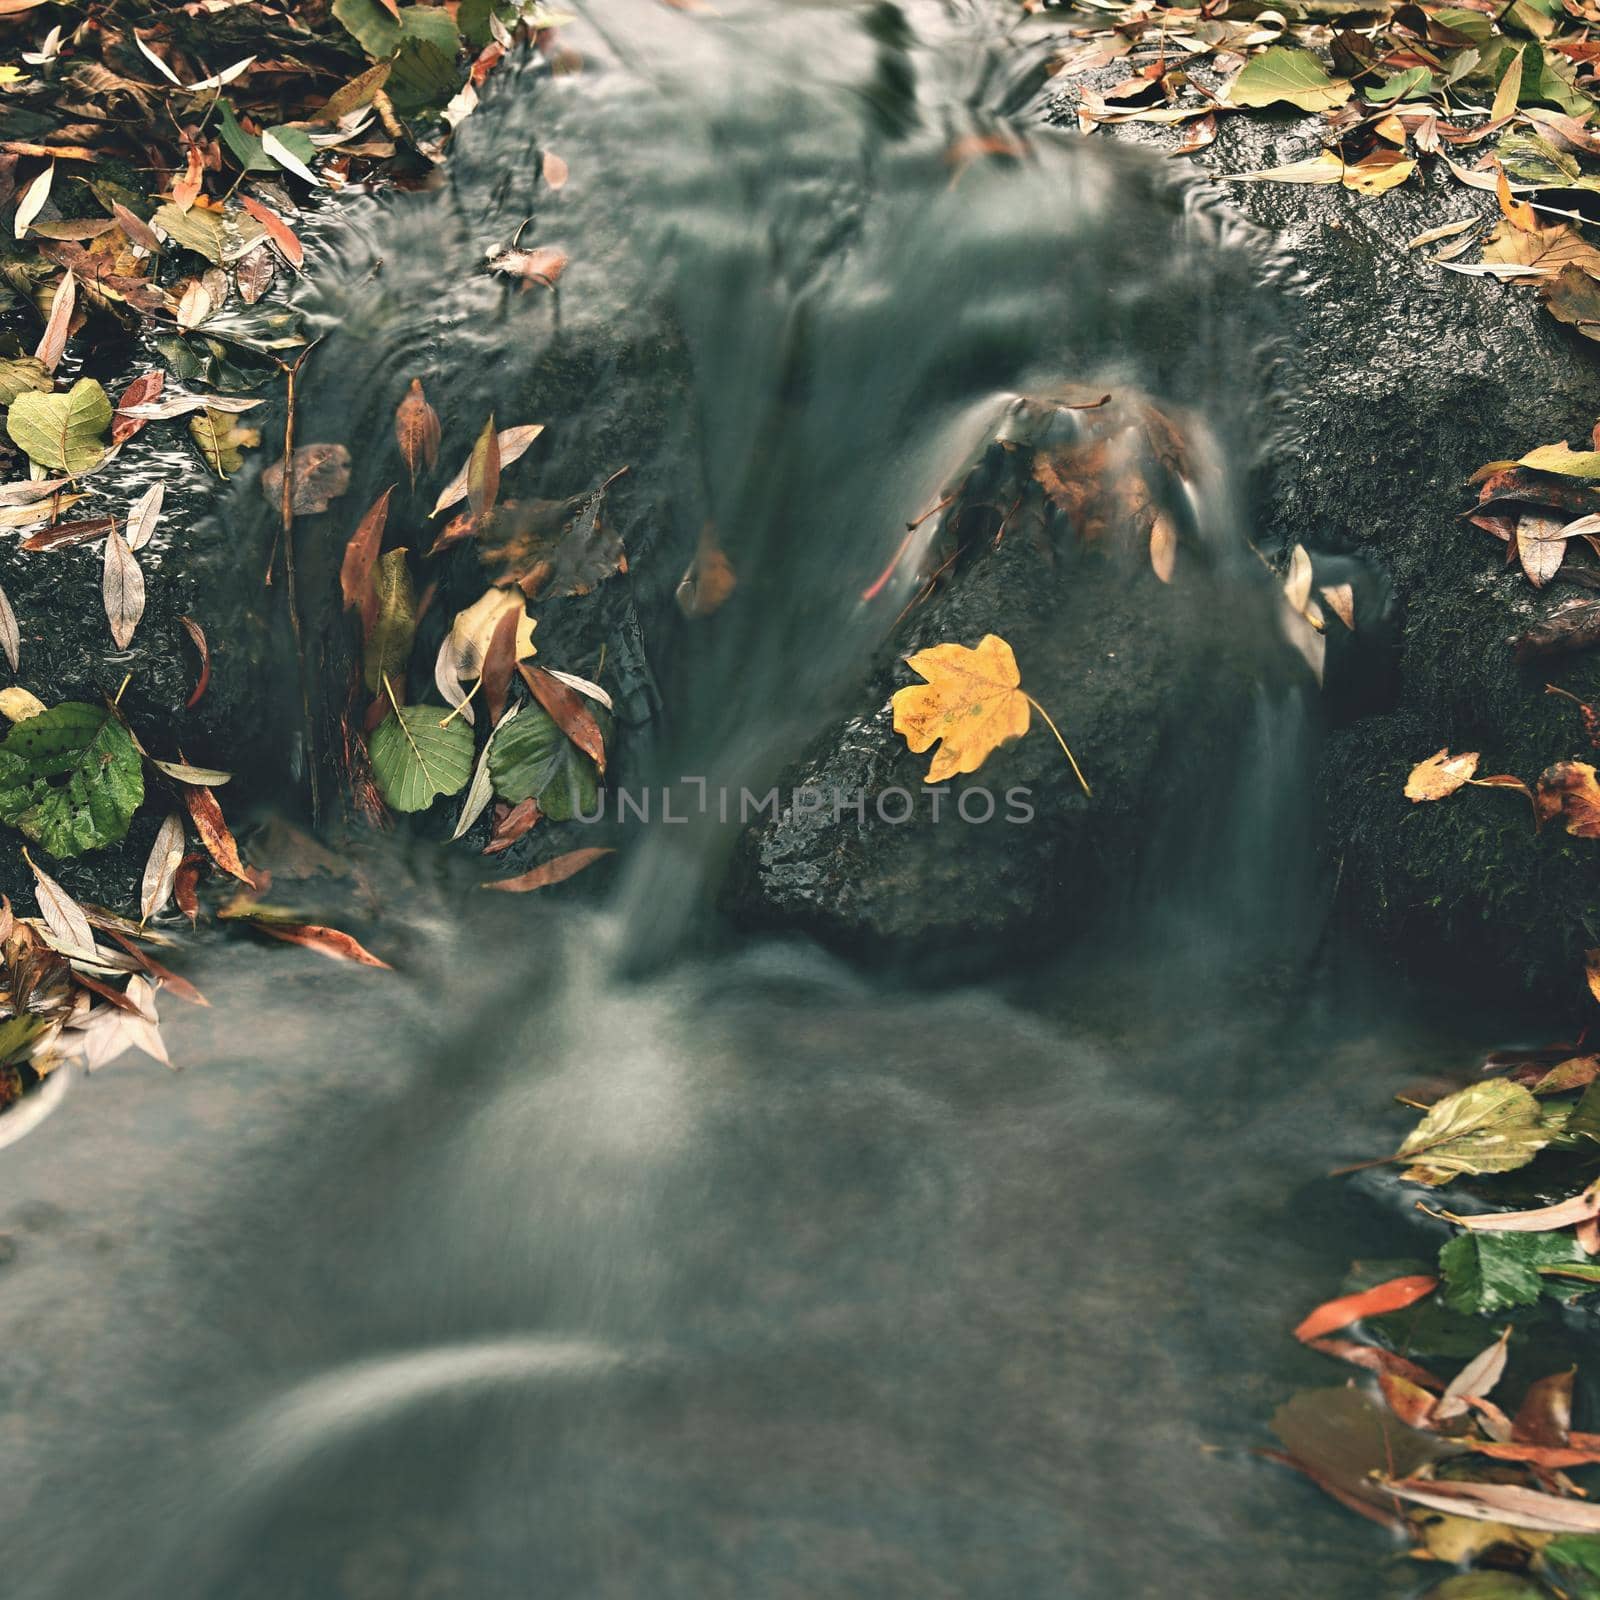 Beautiful autumn nature with a stream.
Autumn leaves. Natural seasonal colored background